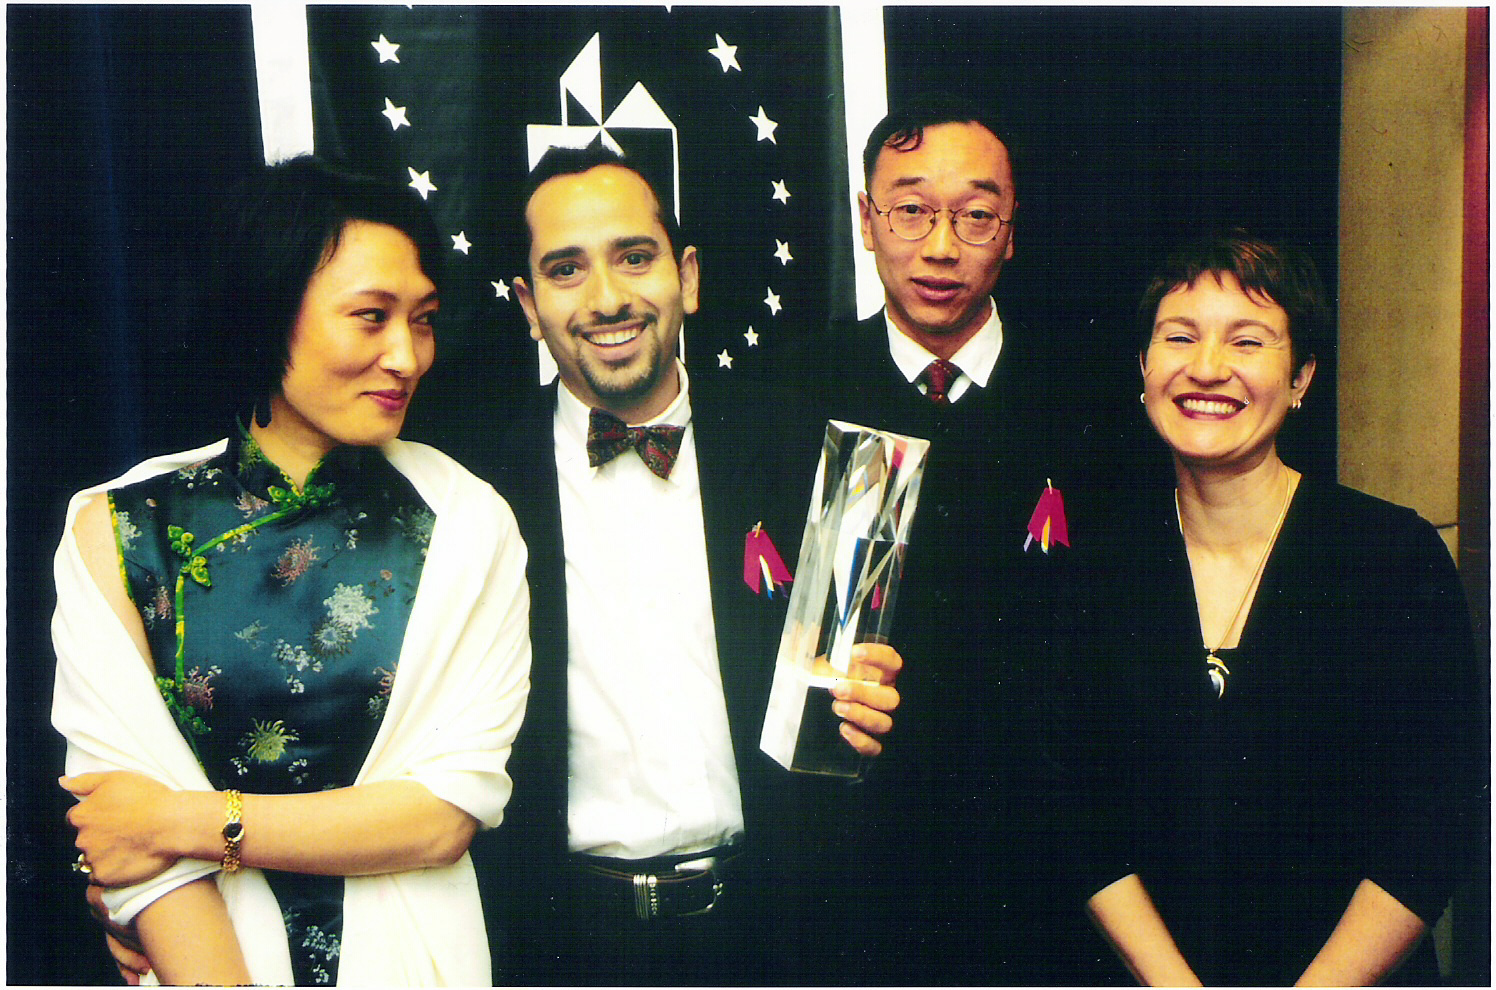 Di Chiera after winning the 1994 AFI Award for Best Mini Series for Under The Skin, episode The Long Ride. With him, Lt to Rt is actress Diana Lin, writer Tony Ayres and director Pip Karmel